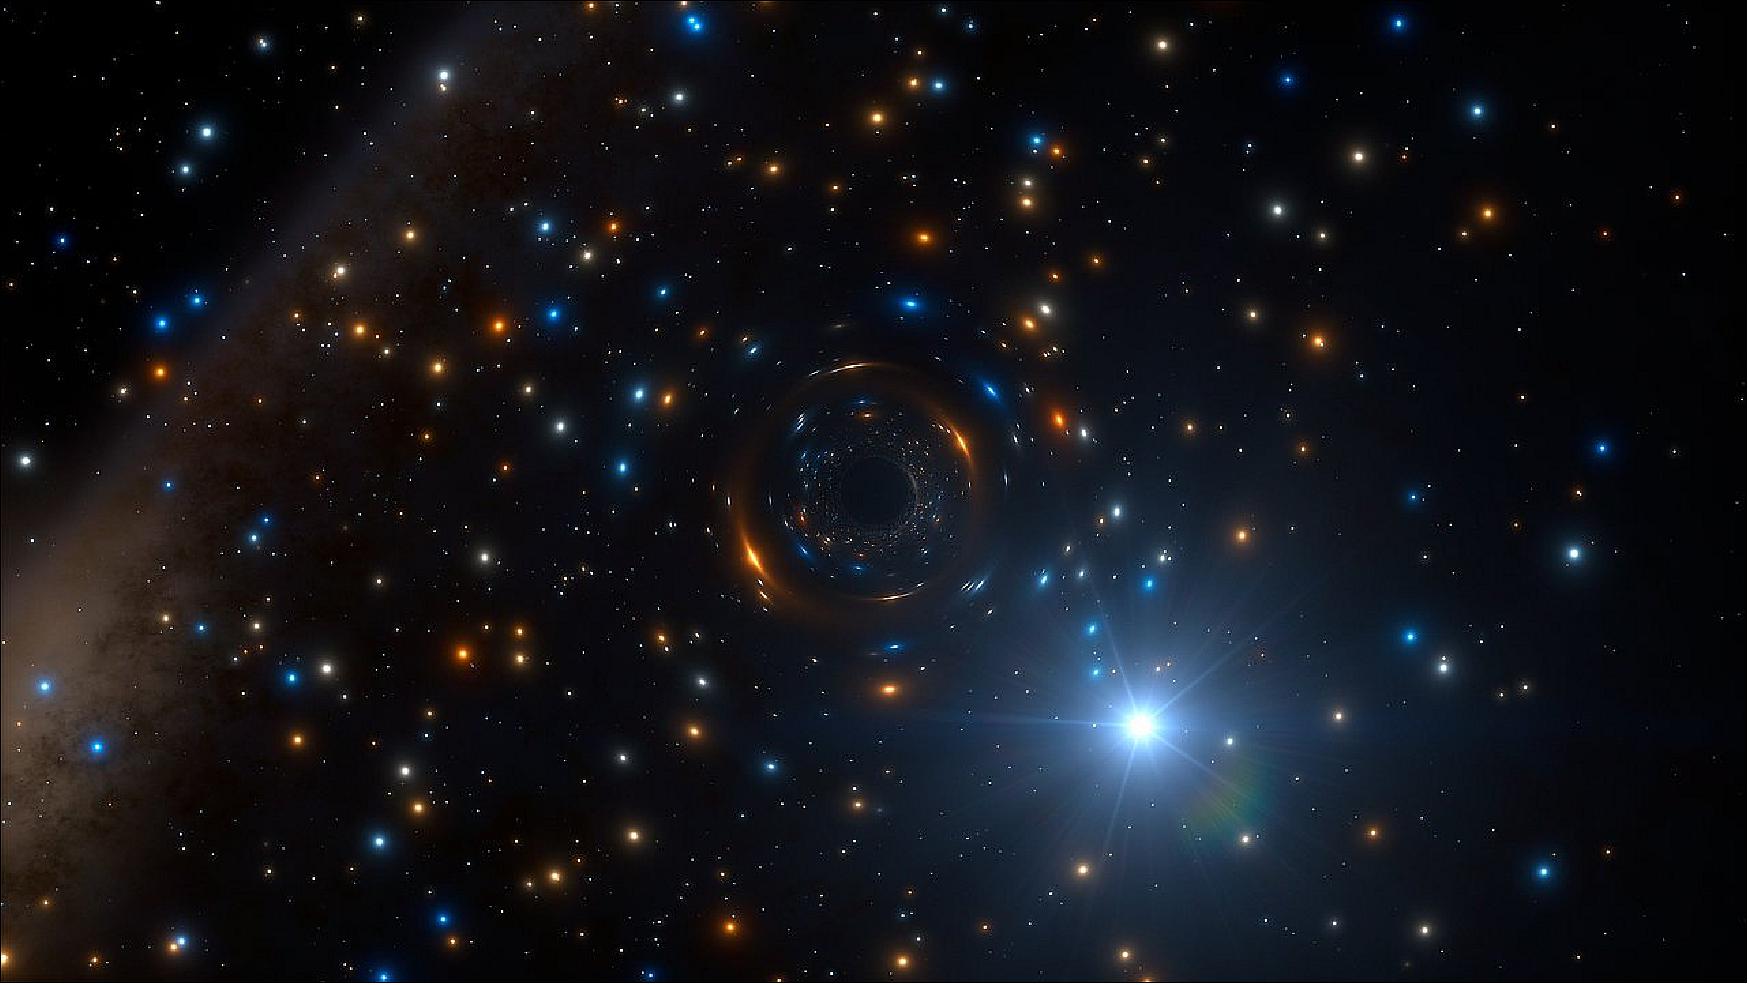 Figure 79: Artist’s impression of the black hole binary system in NGC 3201. Astronomers using ESO’s MUSE instrument on the Very Large Telescope in Chile have discovered a star in the cluster NGC 3201 that is behaving very strangely. It appears to be orbiting an invisible black hole with about four times the mass of the Sun — the first such inactive stellar-mass black hole found in a globular cluster. This important discovery impacts on our understanding of the formation of these star clusters, black holes, and the origins of gravitational wave events. This artist’s impression shows how the star and its massive but invisible black hole companion may look, in the rich heart of the globular star cluster (image credit: ESO/L. Calçada/spaceengine.org)